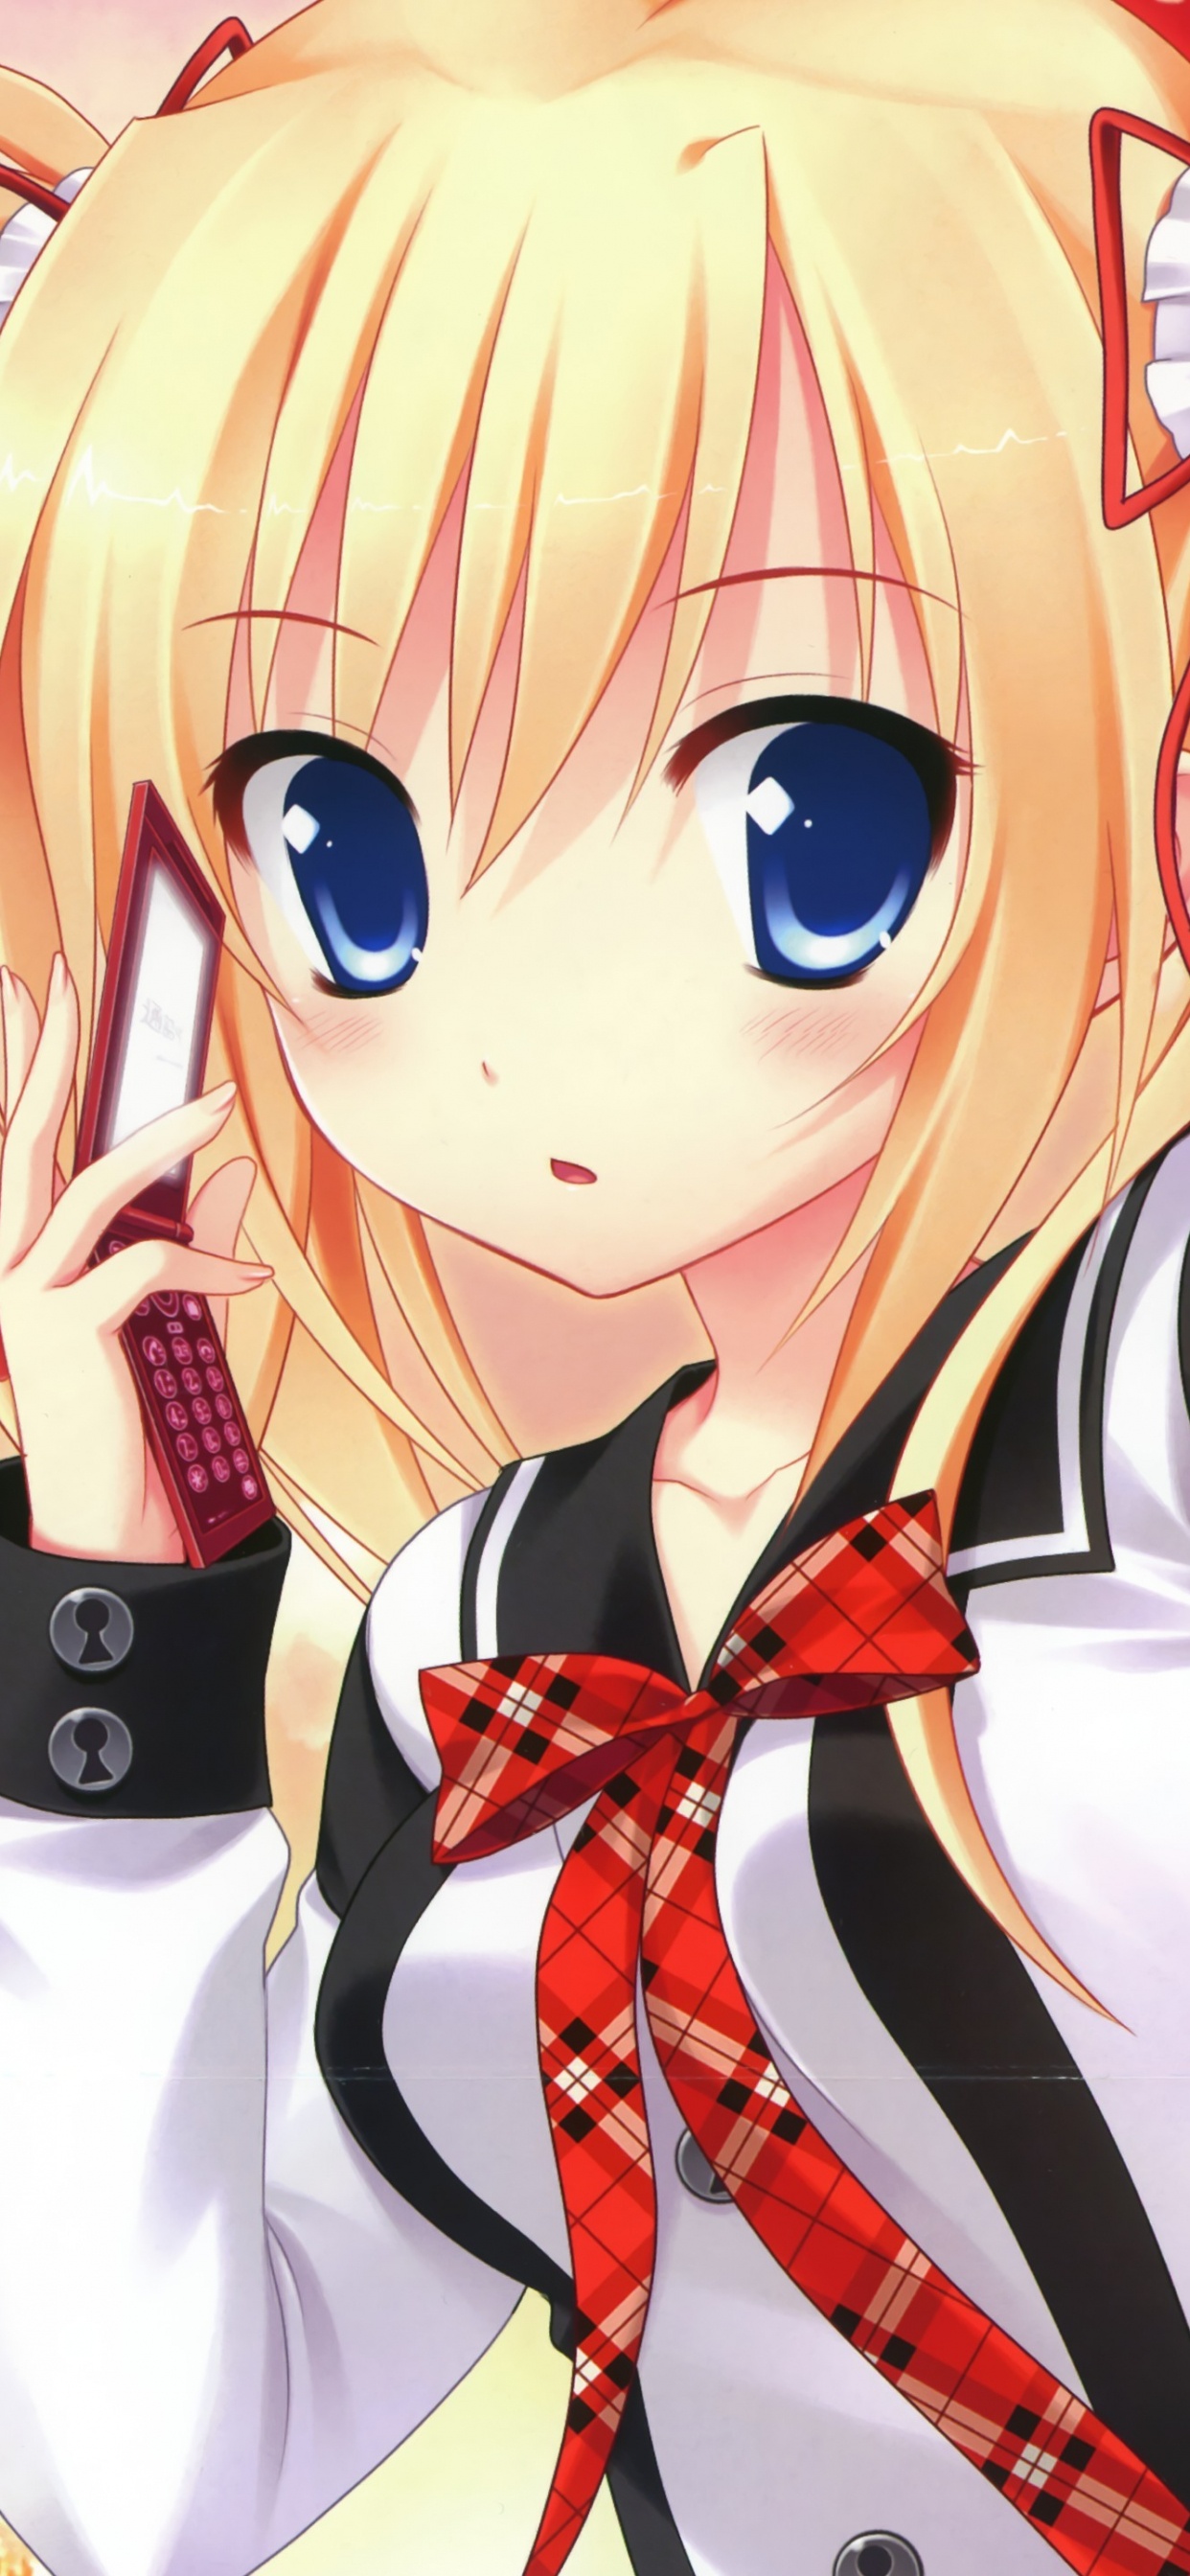 Personnage D'anime Fille Aux Cheveux Blonds. Wallpaper in 1242x2688 Resolution